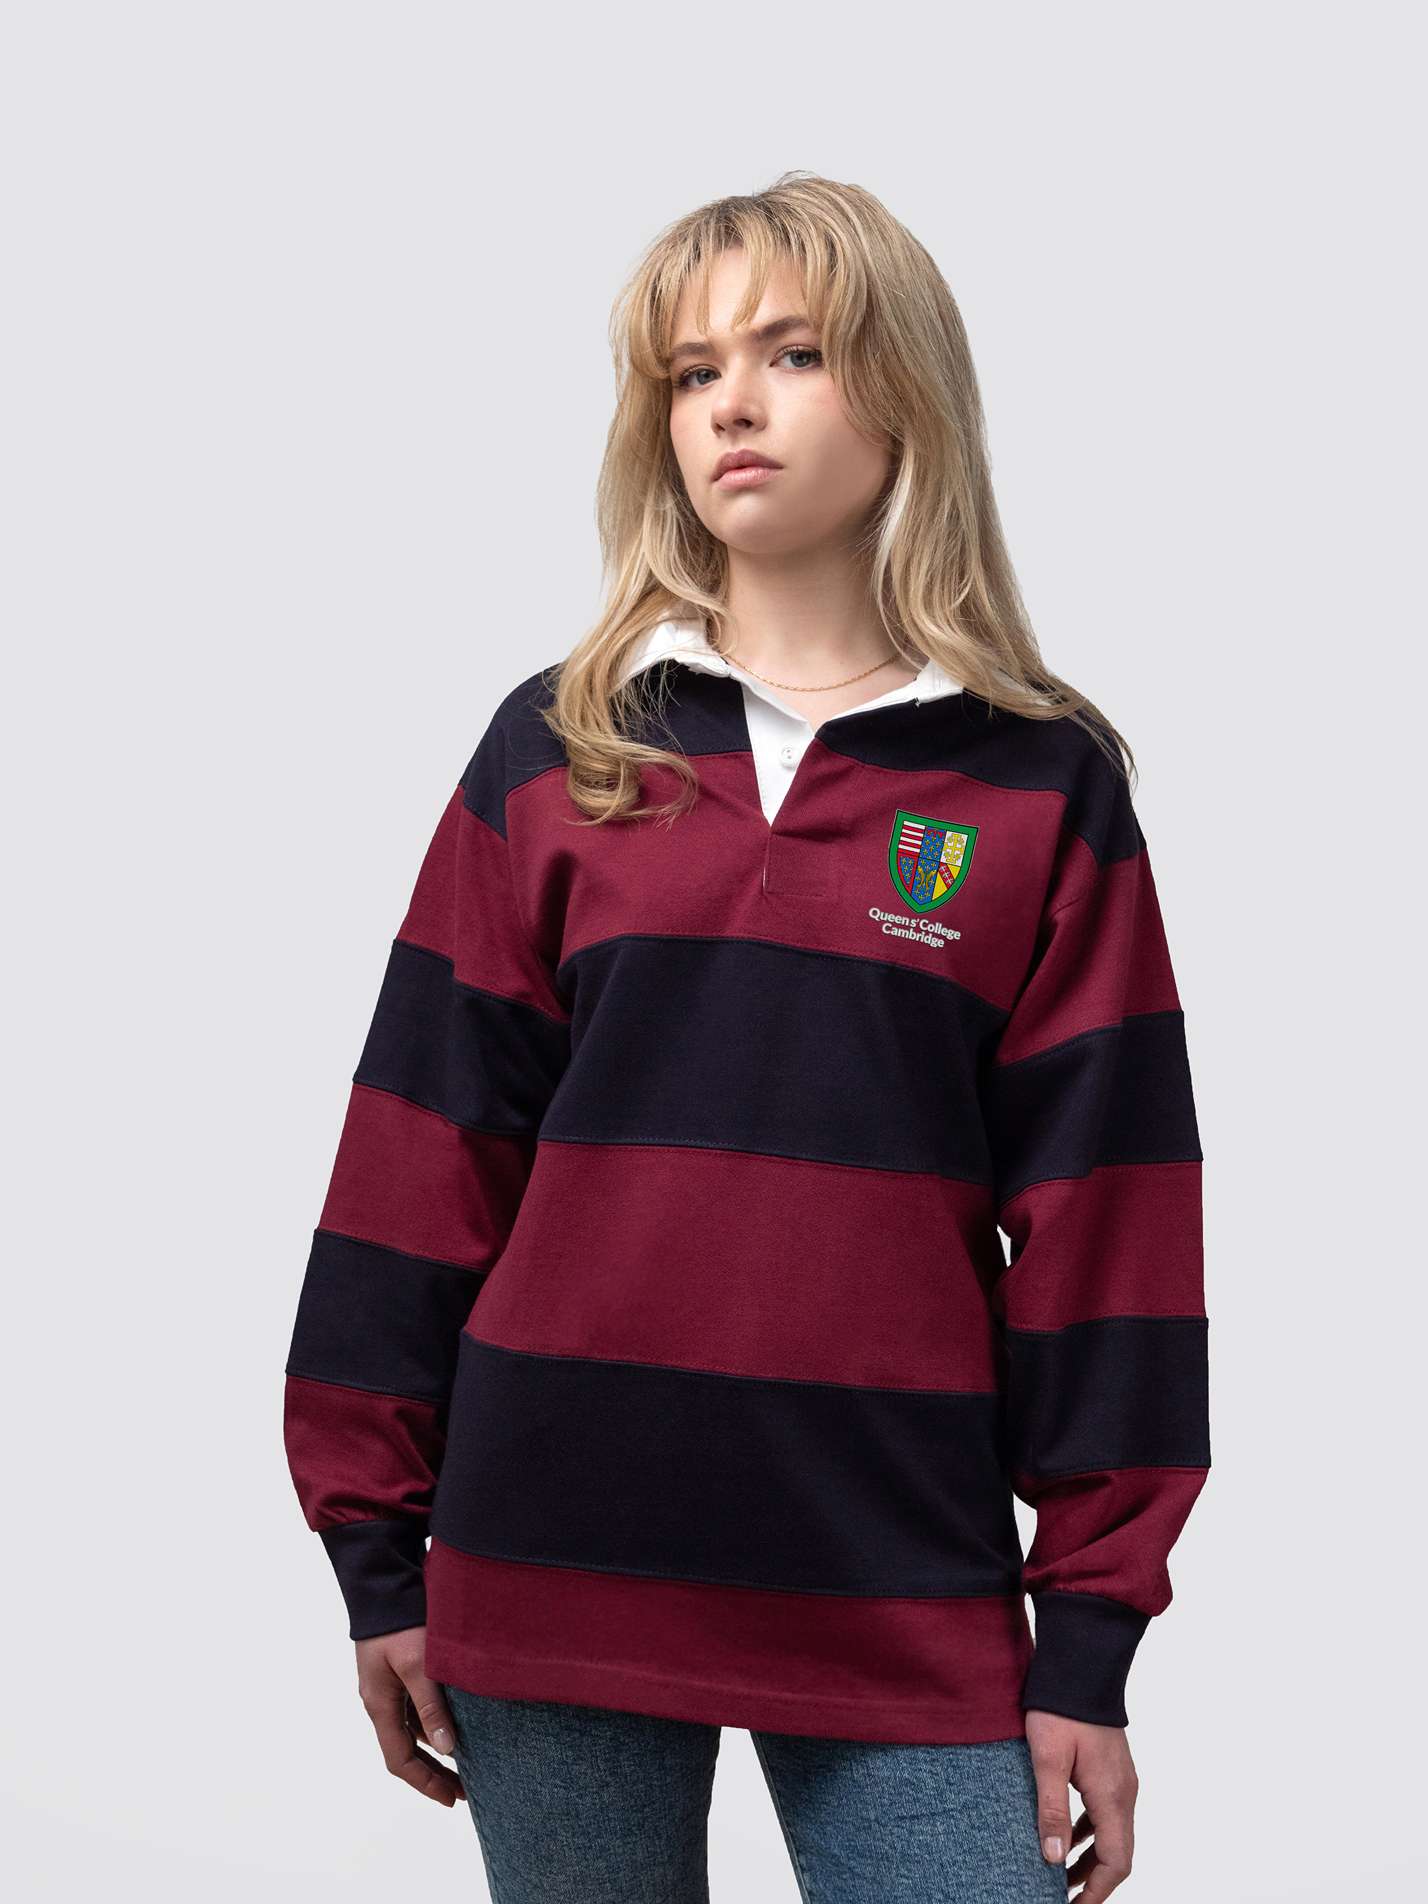 Queens' College rugby shirt, with burgundy and navy stripes